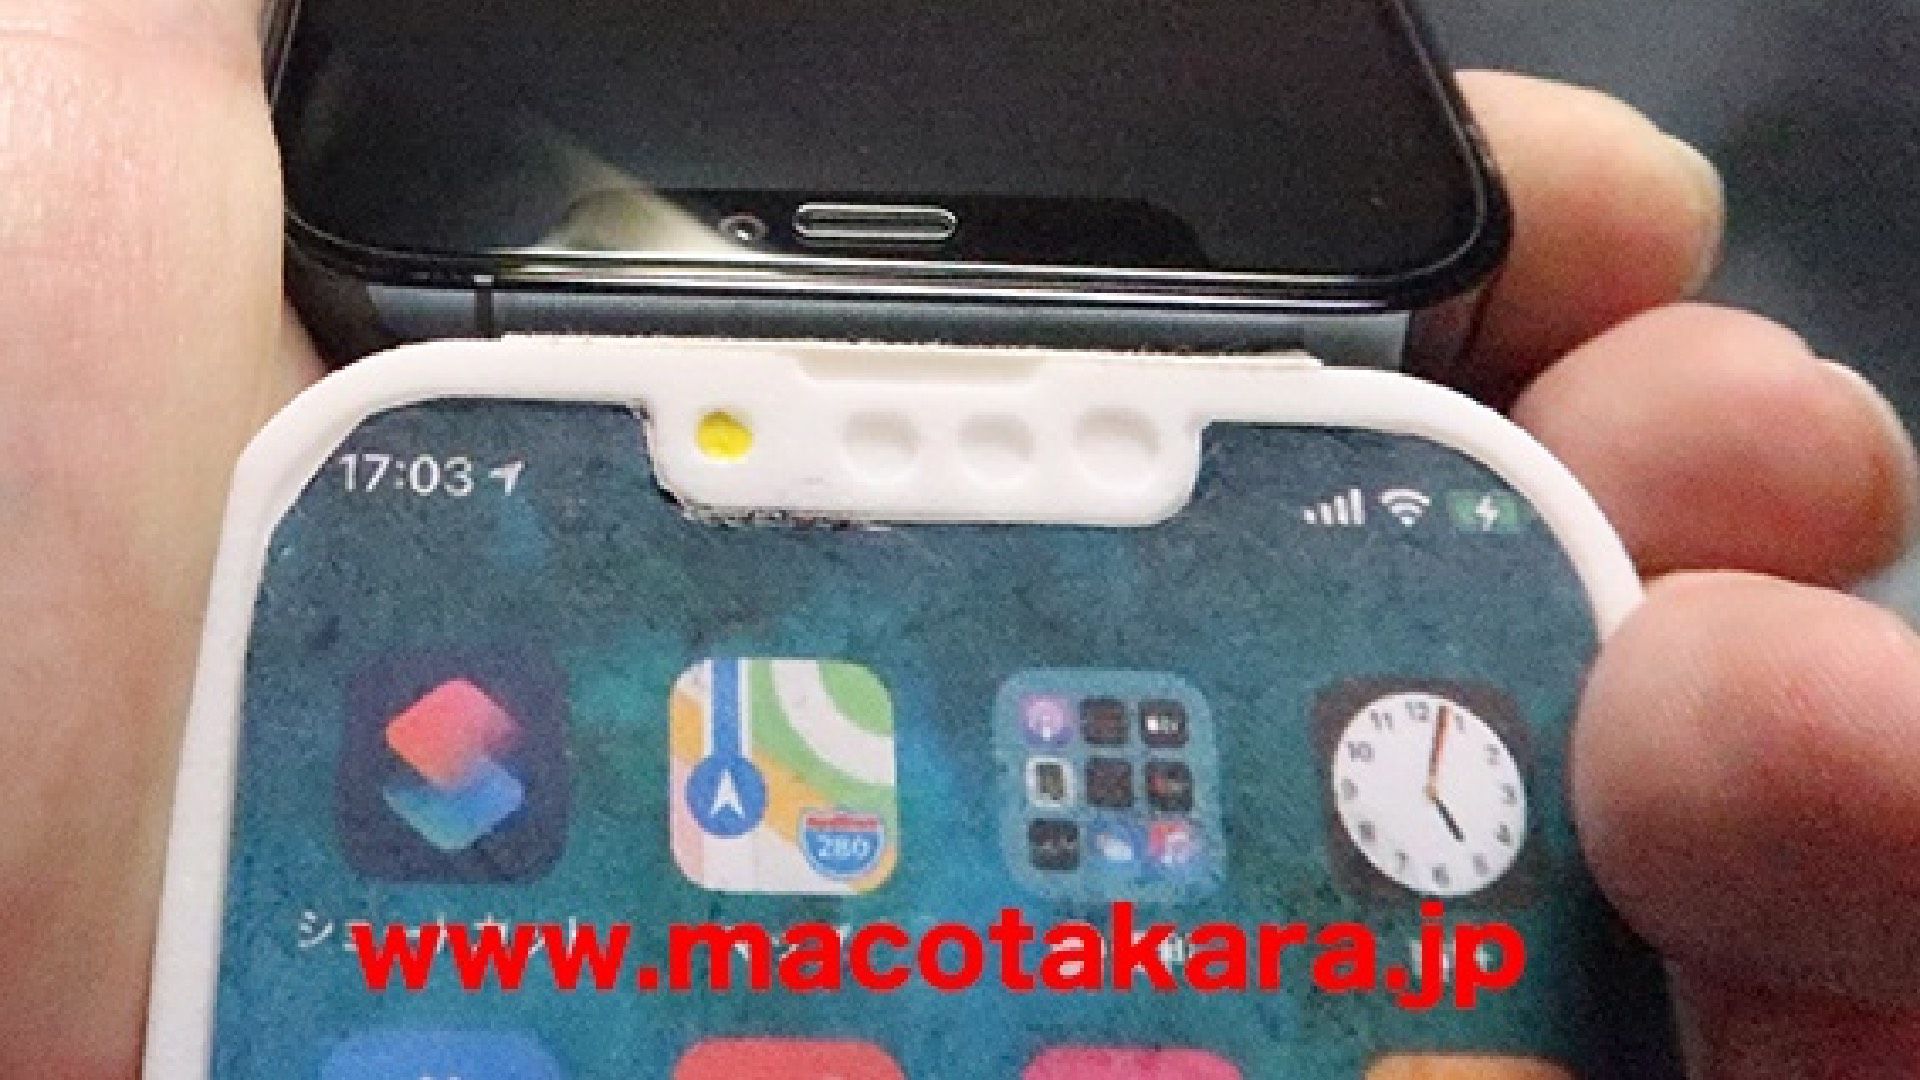 The car of the supposed iPhone 13 Pro displays smaller notches, repositioned headset and front camera